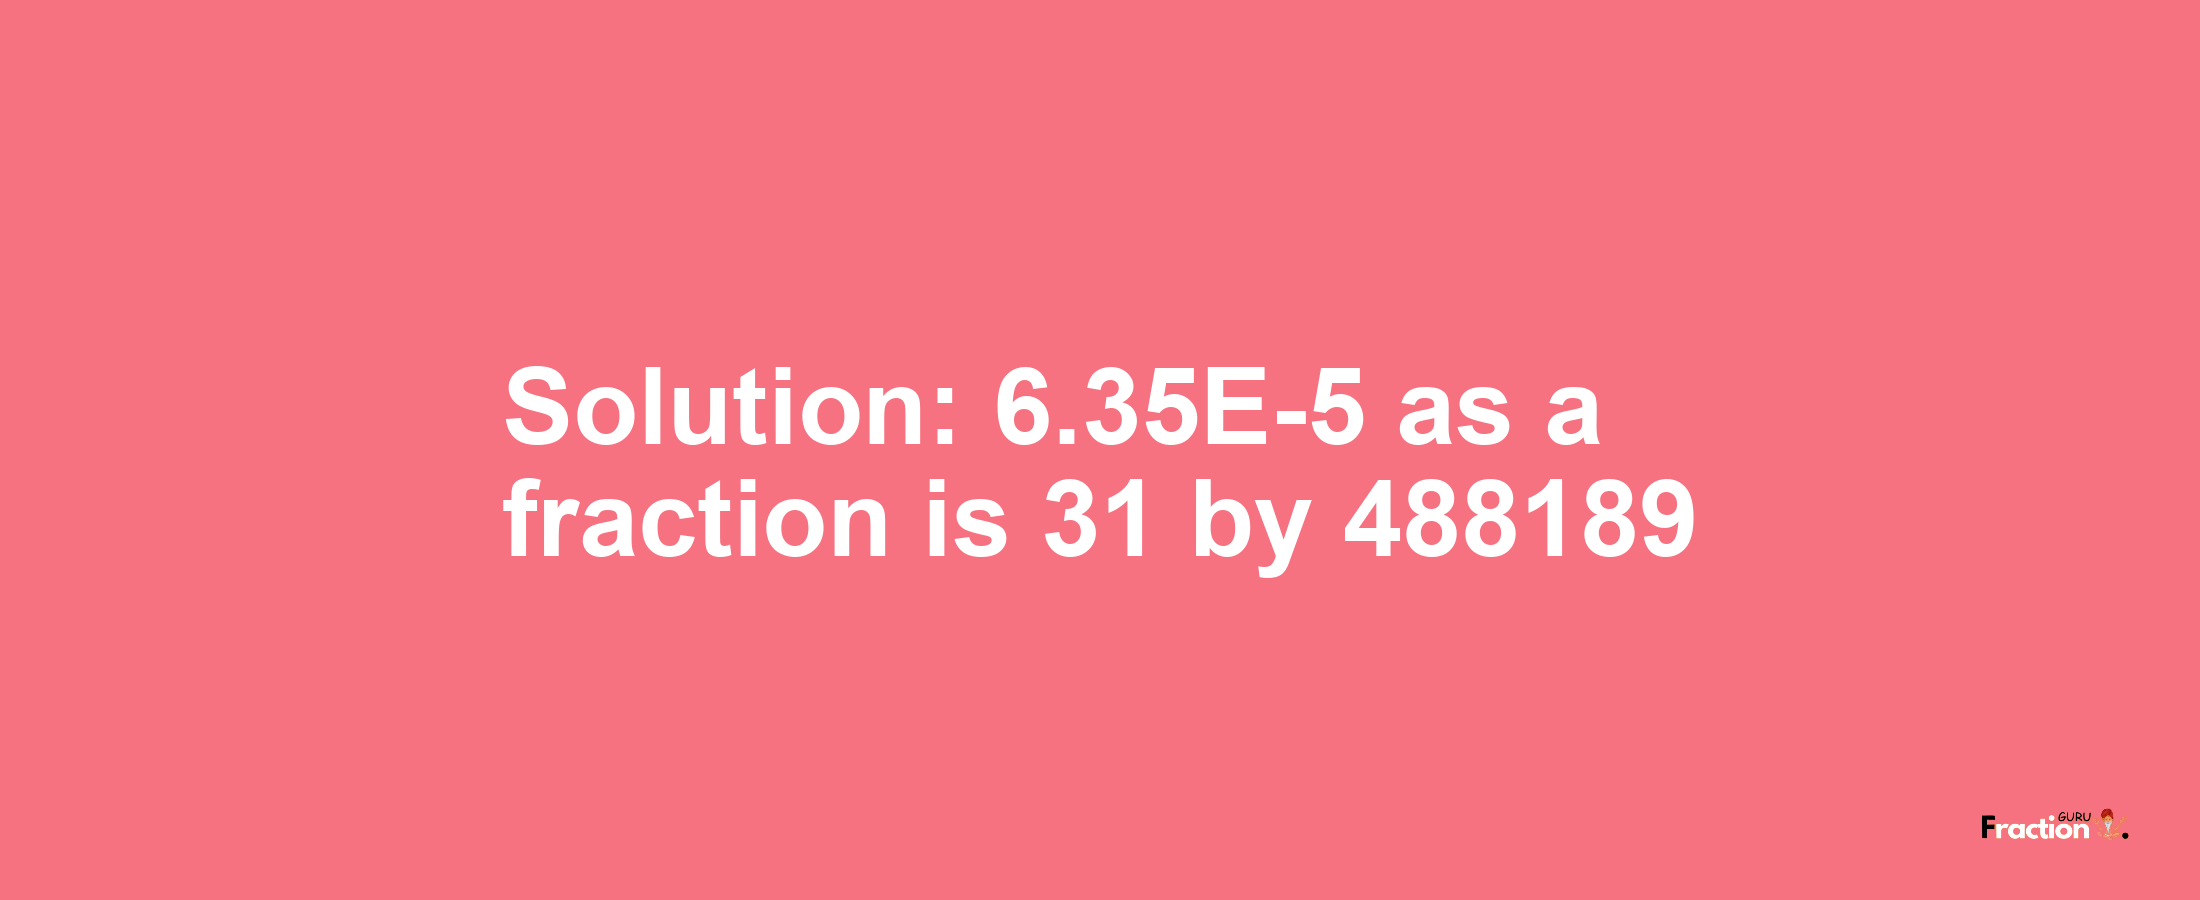 Solution:6.35E-5 as a fraction is 31/488189